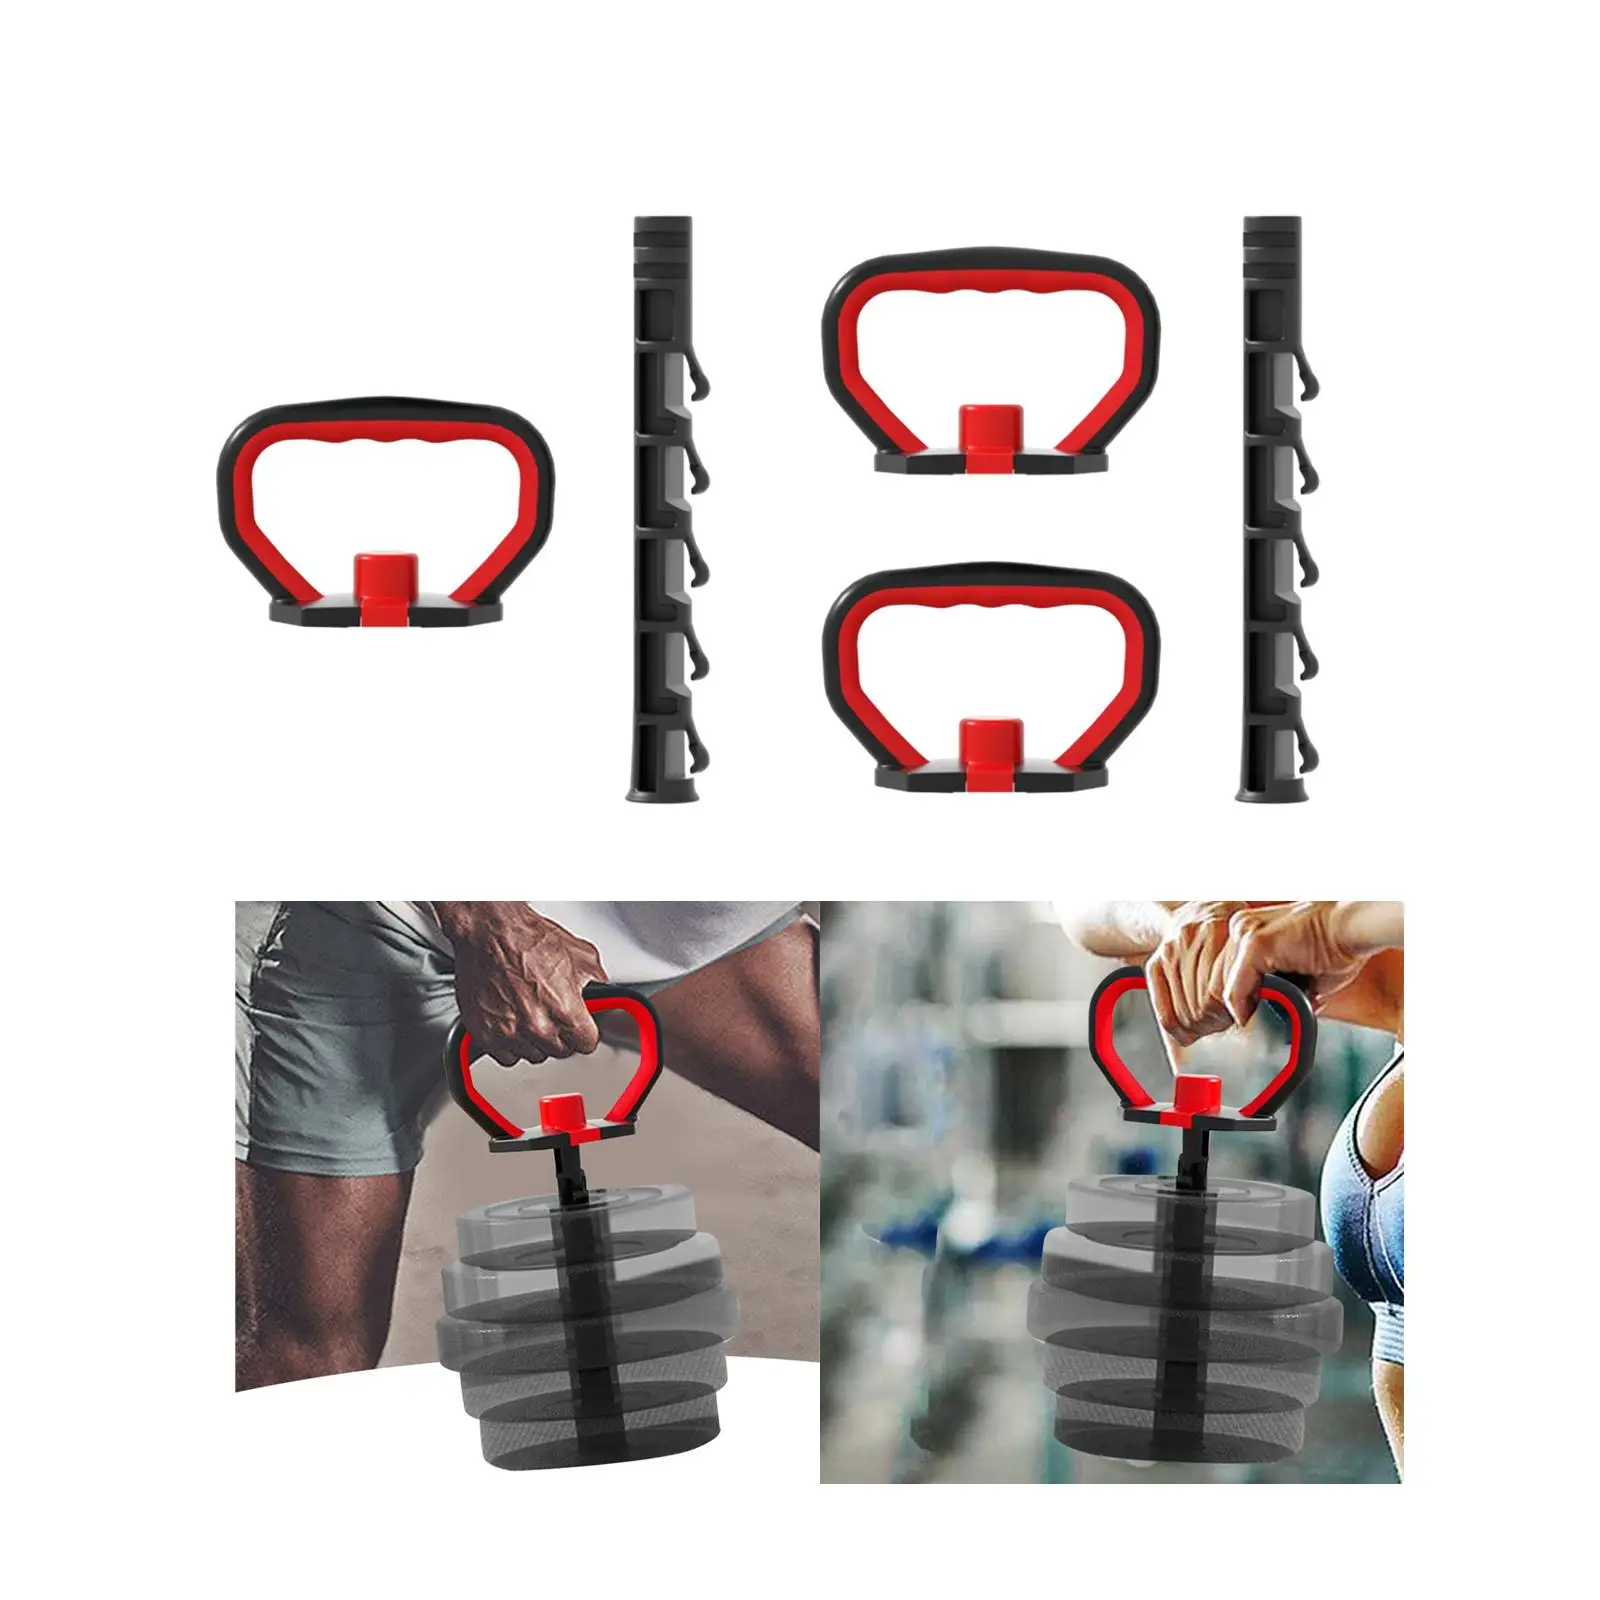 Adjustable Kettlebell Handle with Base Dumbbell Grip Workout Equipment Fitness Anti Slip Dumbbell Push up for Plates Weights